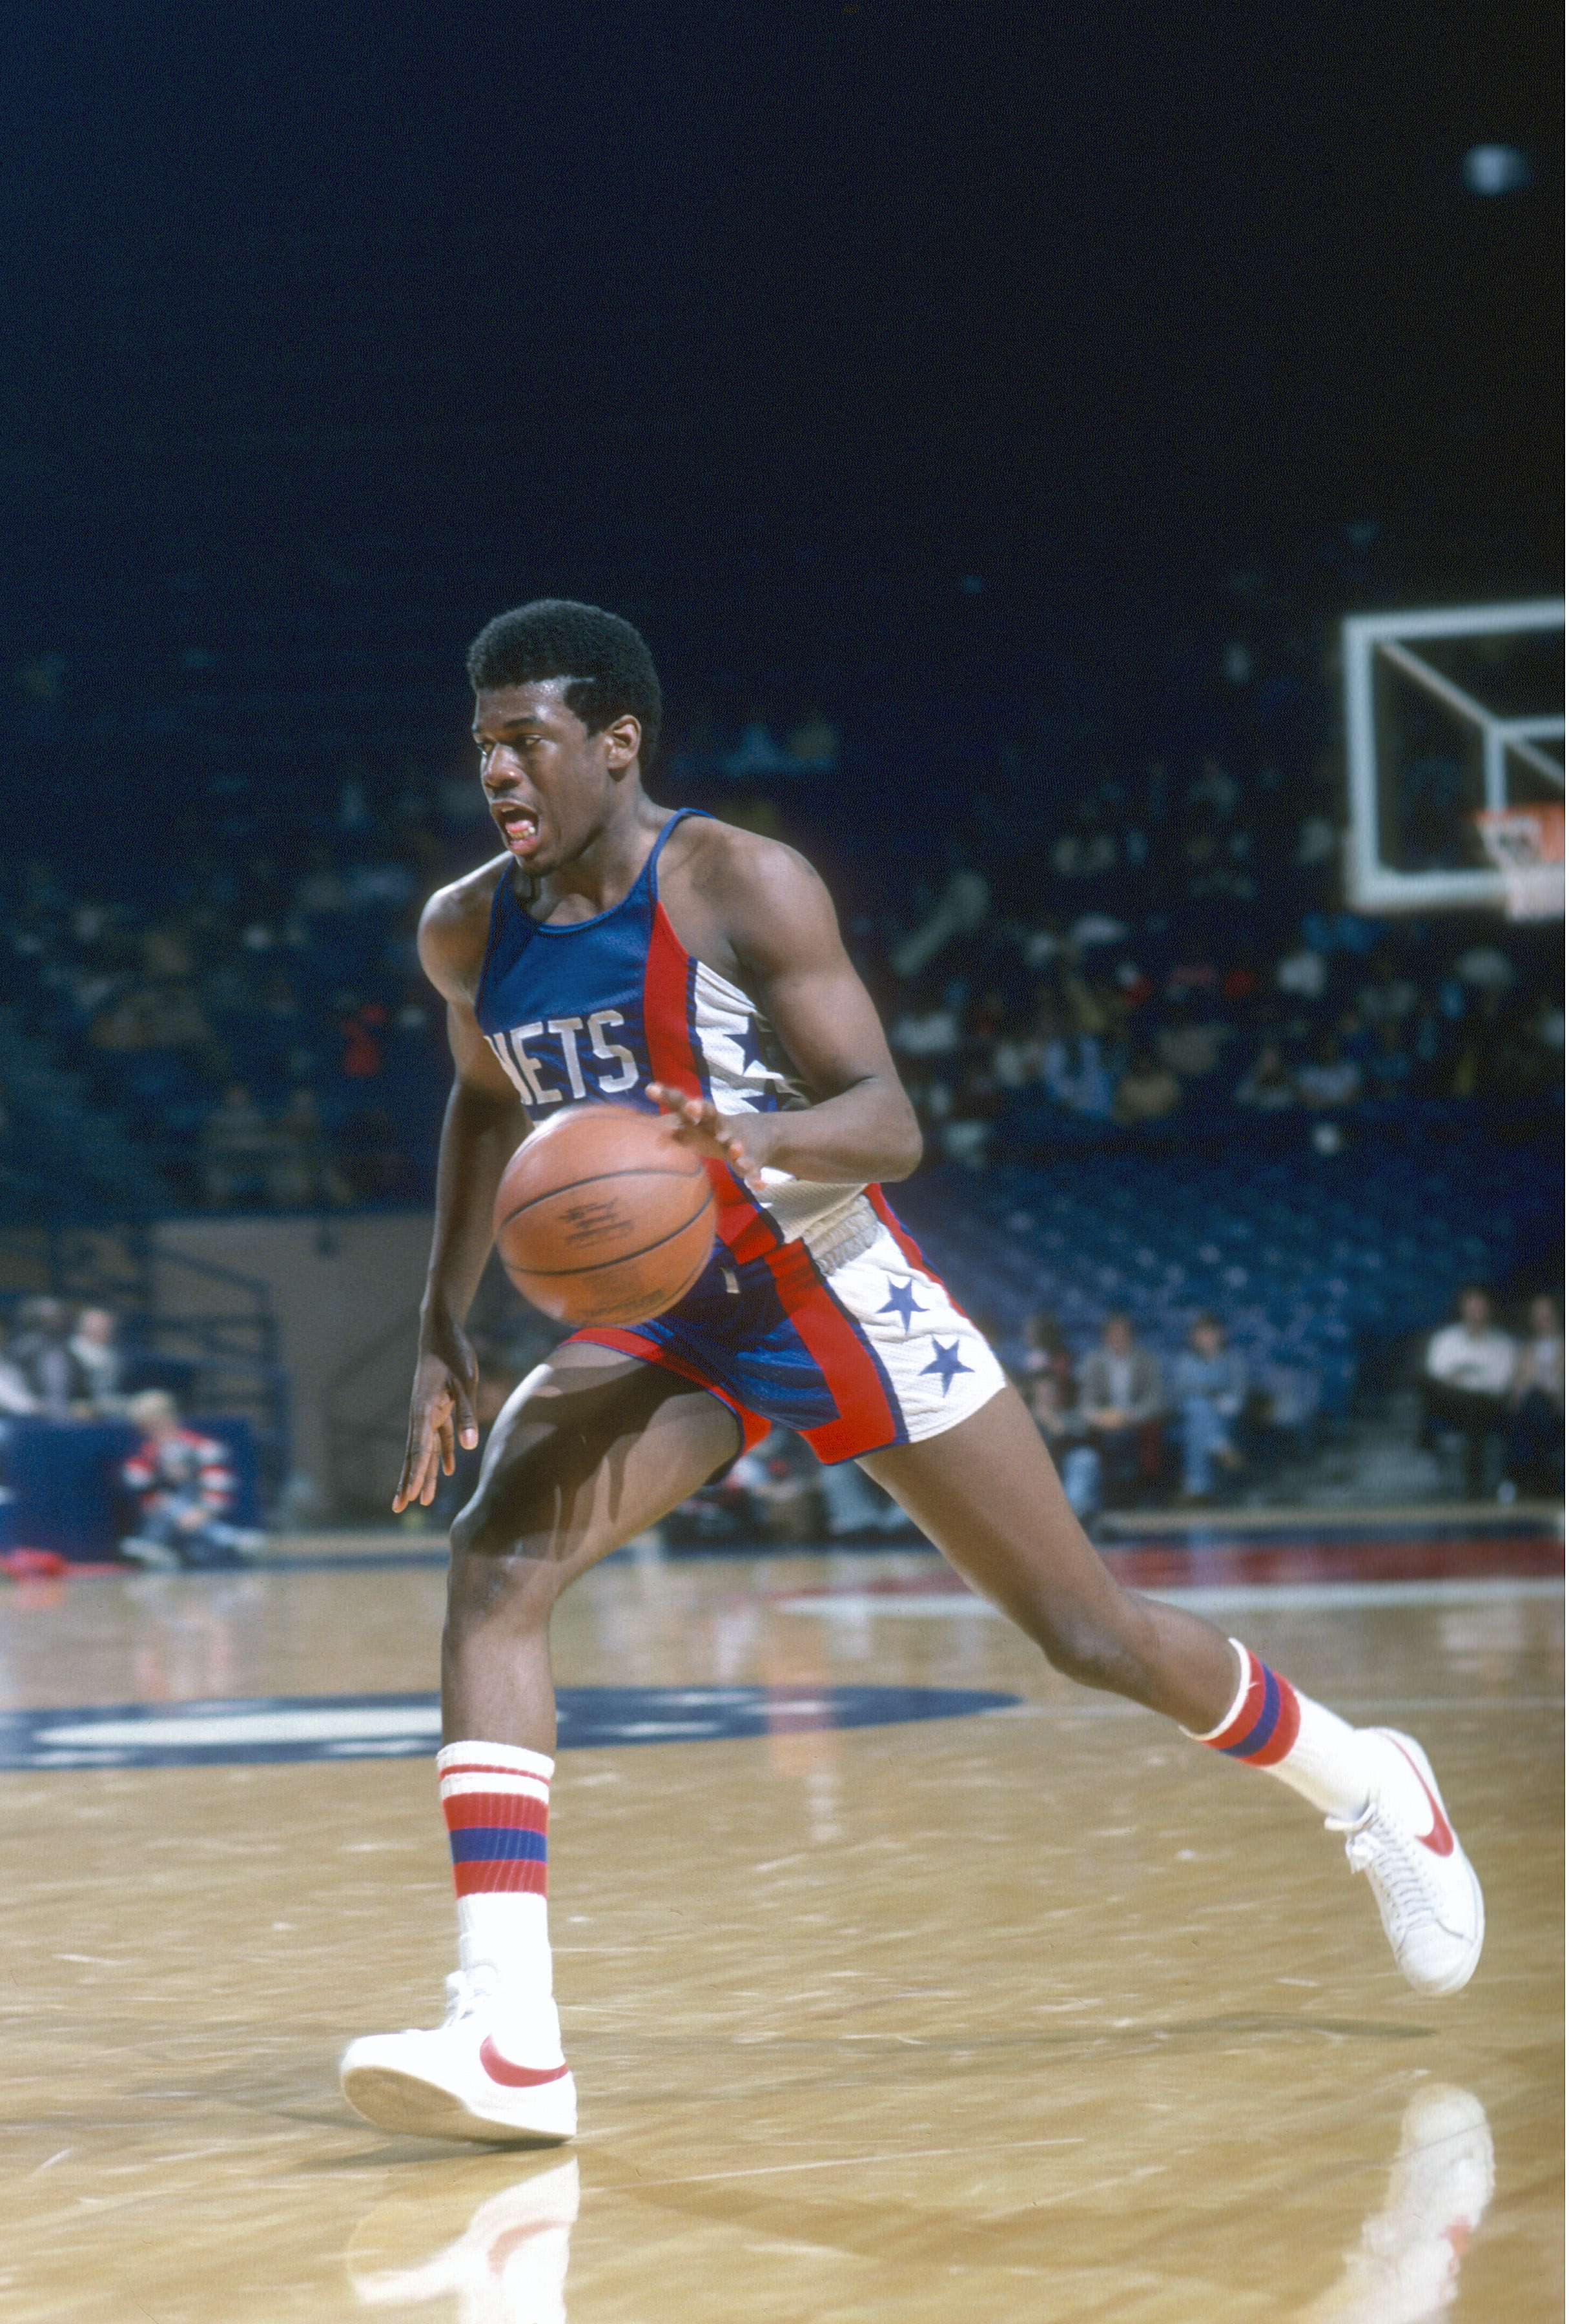 This is a photo of Bernard King in his 1978 season with the Nets.